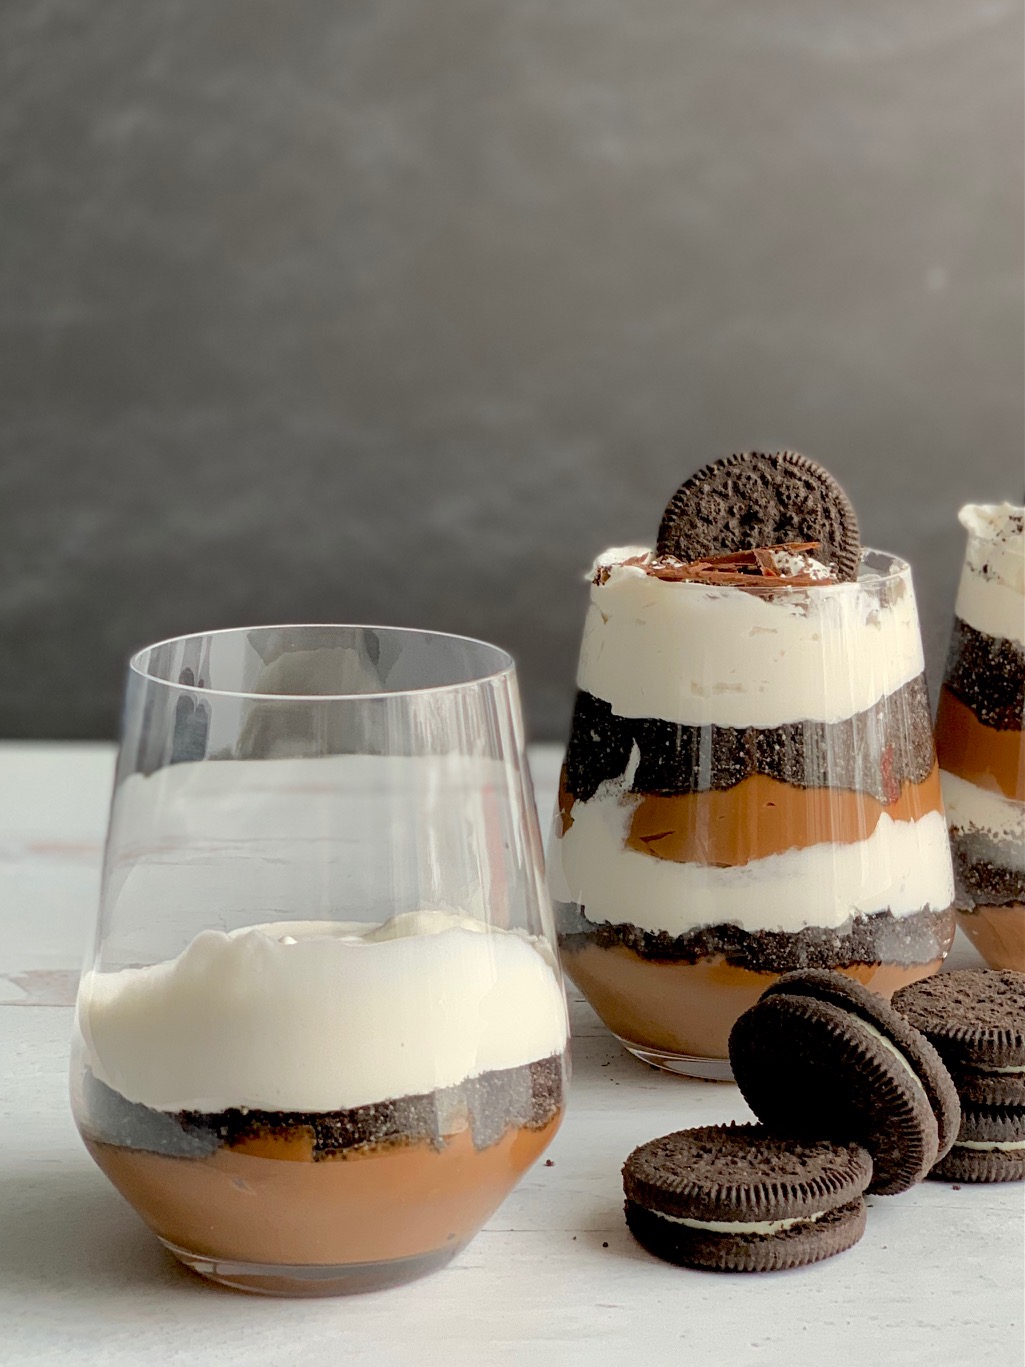 View from above 3 glass jars layered diagonally with homemade thick chocolate pudding, crushed oreo-style cookies and creamy white whipped topping. Then, topped with crushed biscuits, an oreo-like cookie, and chocolate chips. Next to the glass jars are cookies more like Oreo.